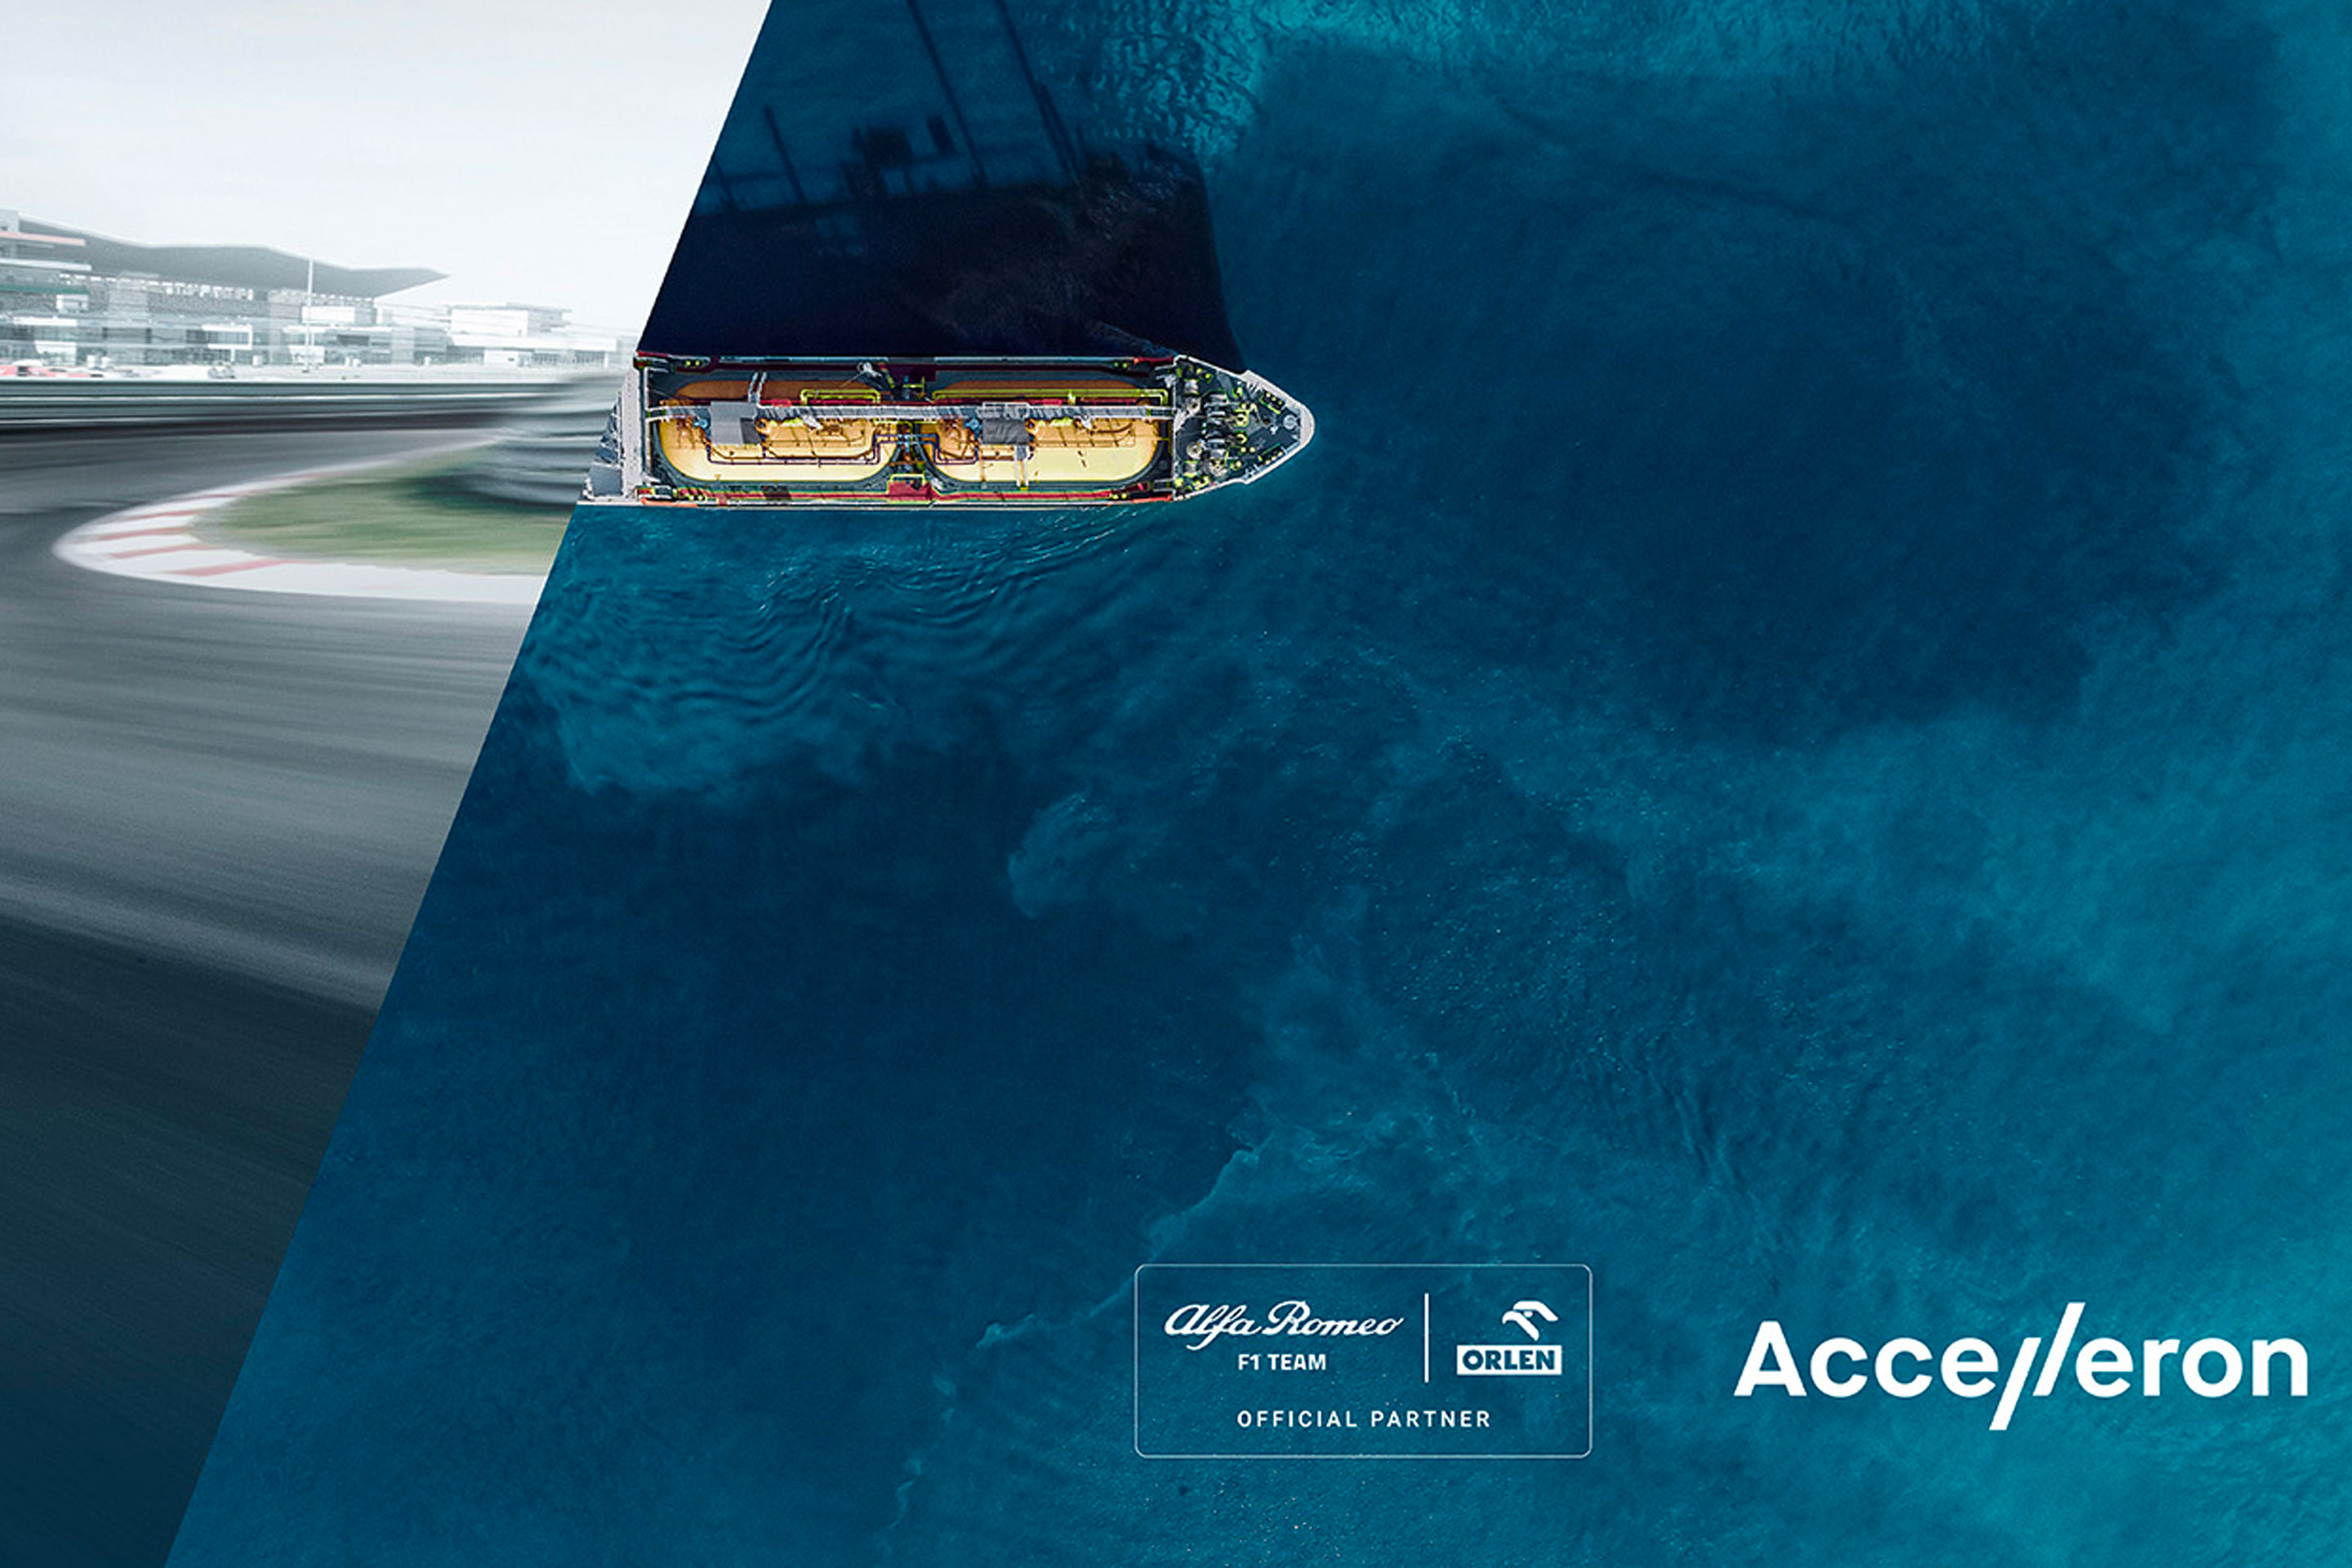 An image showing a racing track and ocean liner to highlight how F1 team Sauber are working in partnership with Accelleron